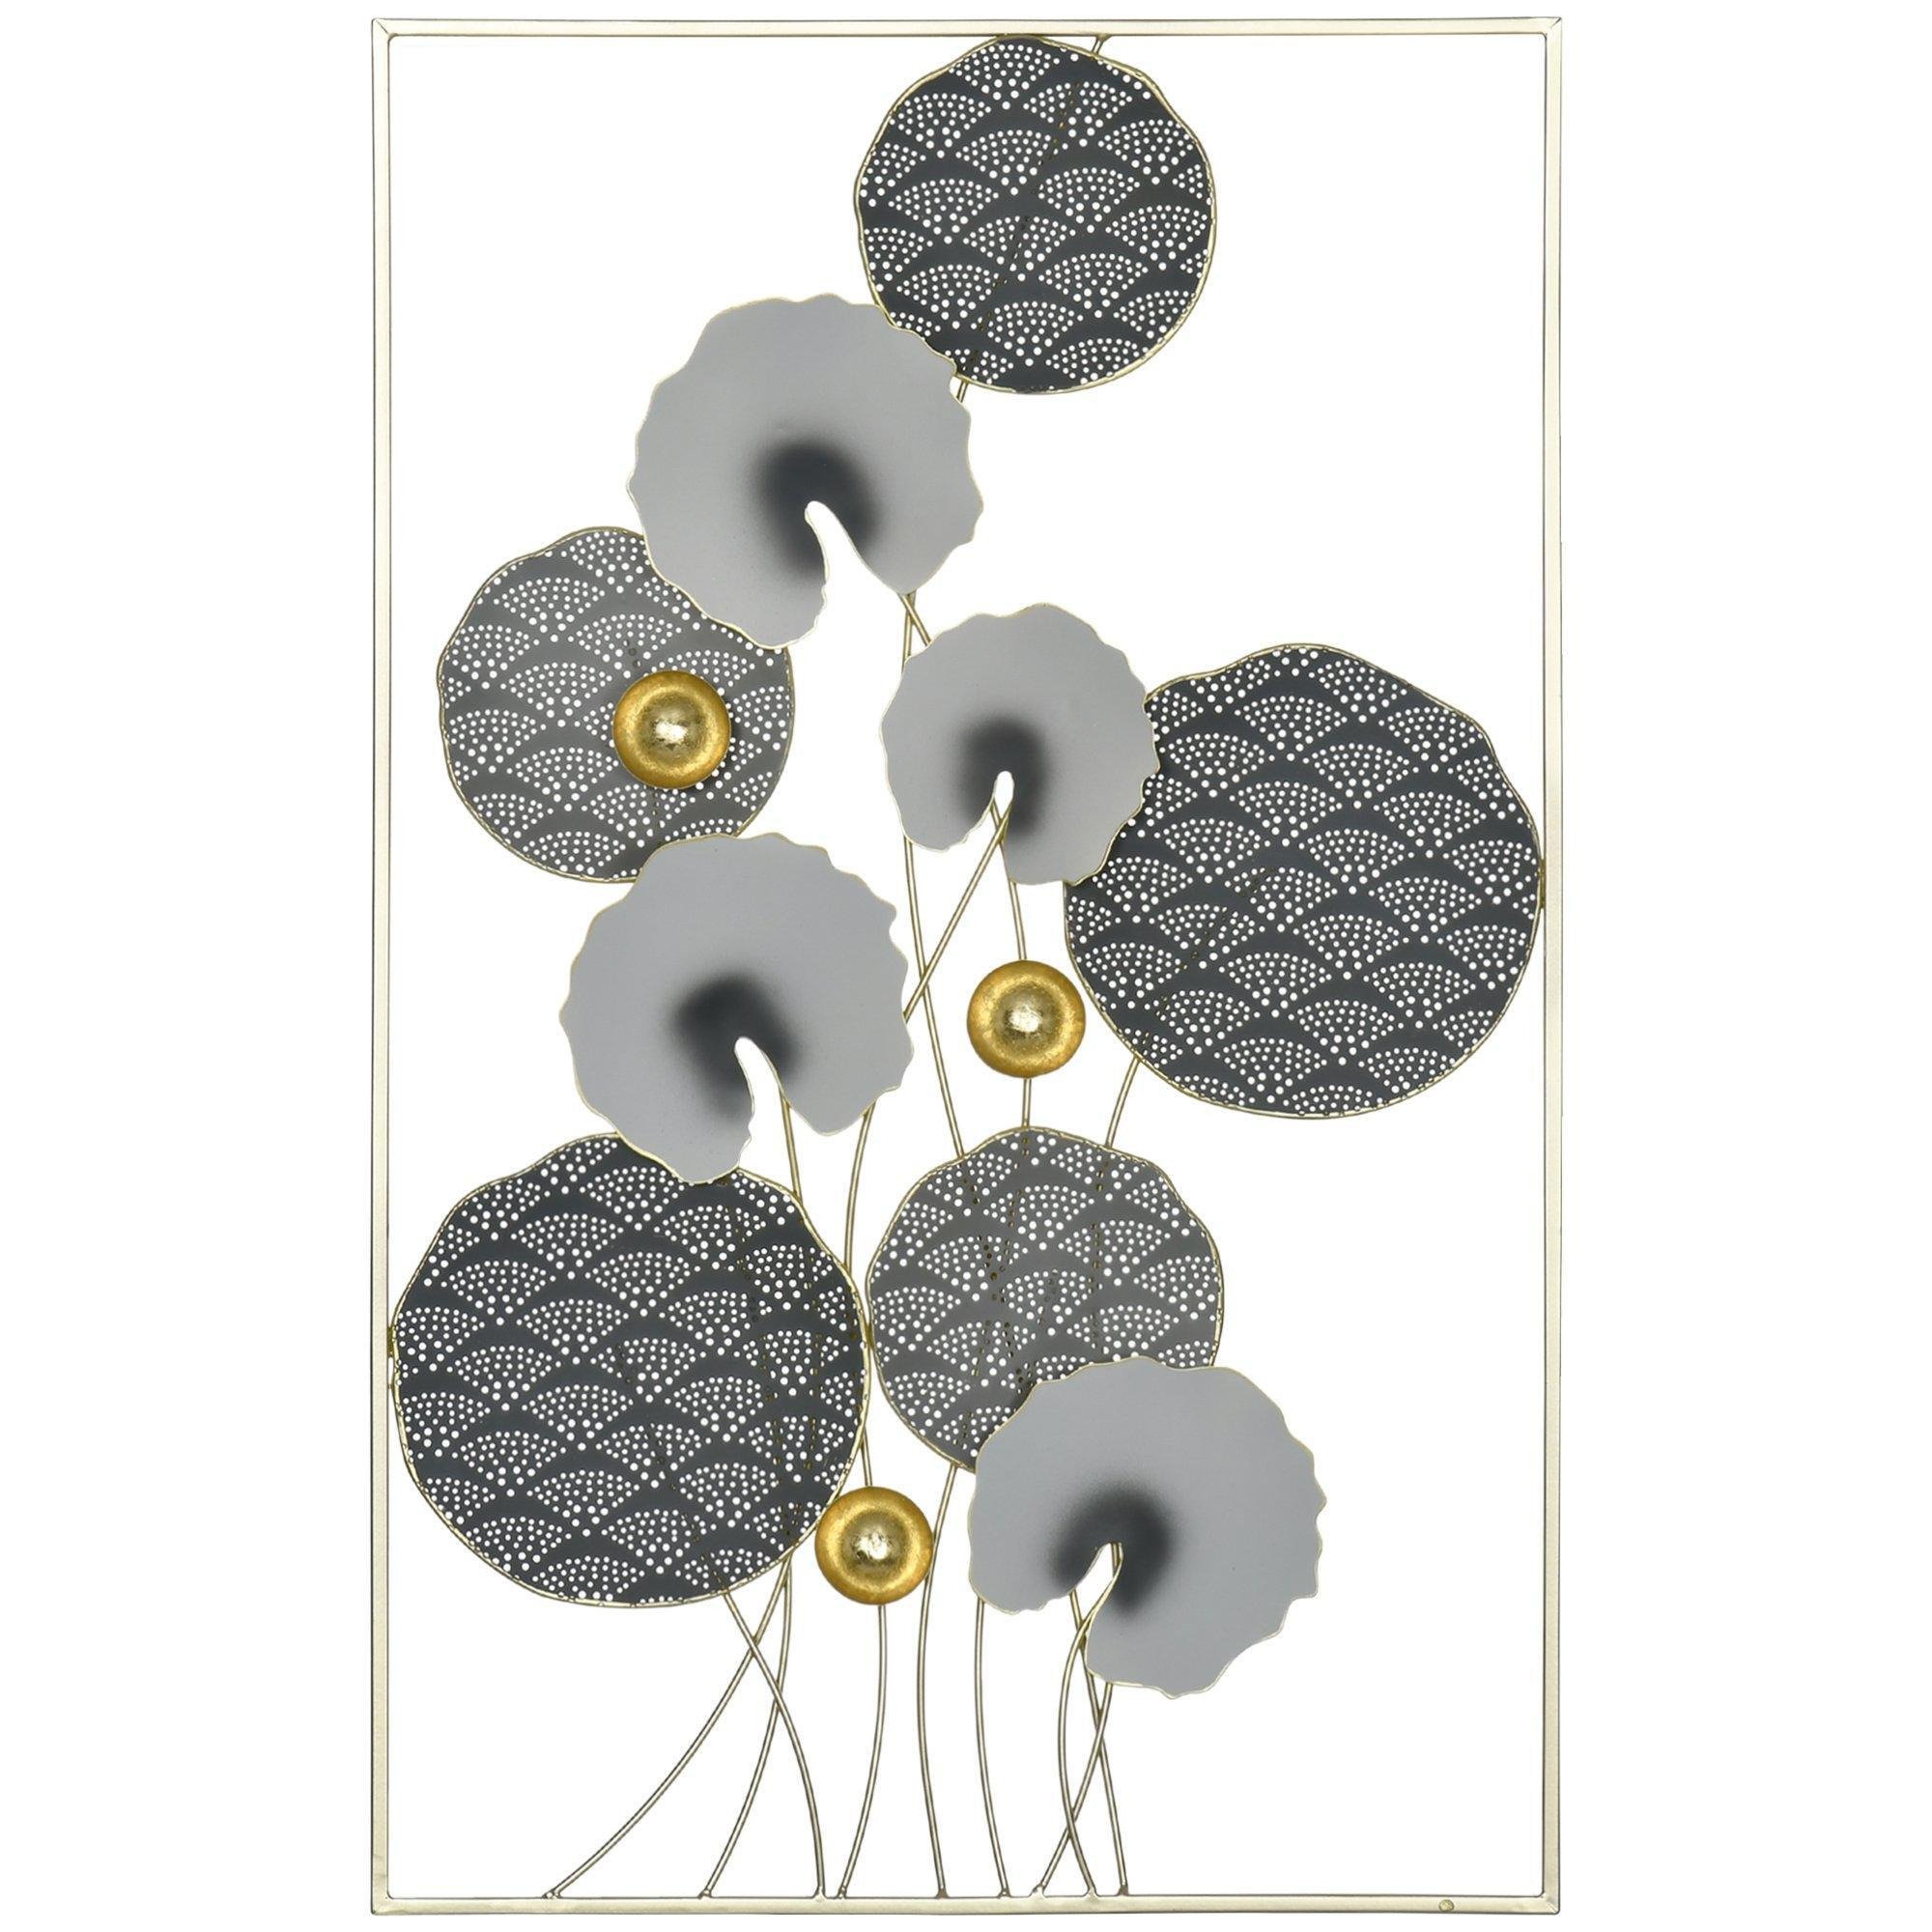 3D Metal Wall Art Modern Lotus Leaves Hanging Wall Sculpture Home Gold Decor - image 1